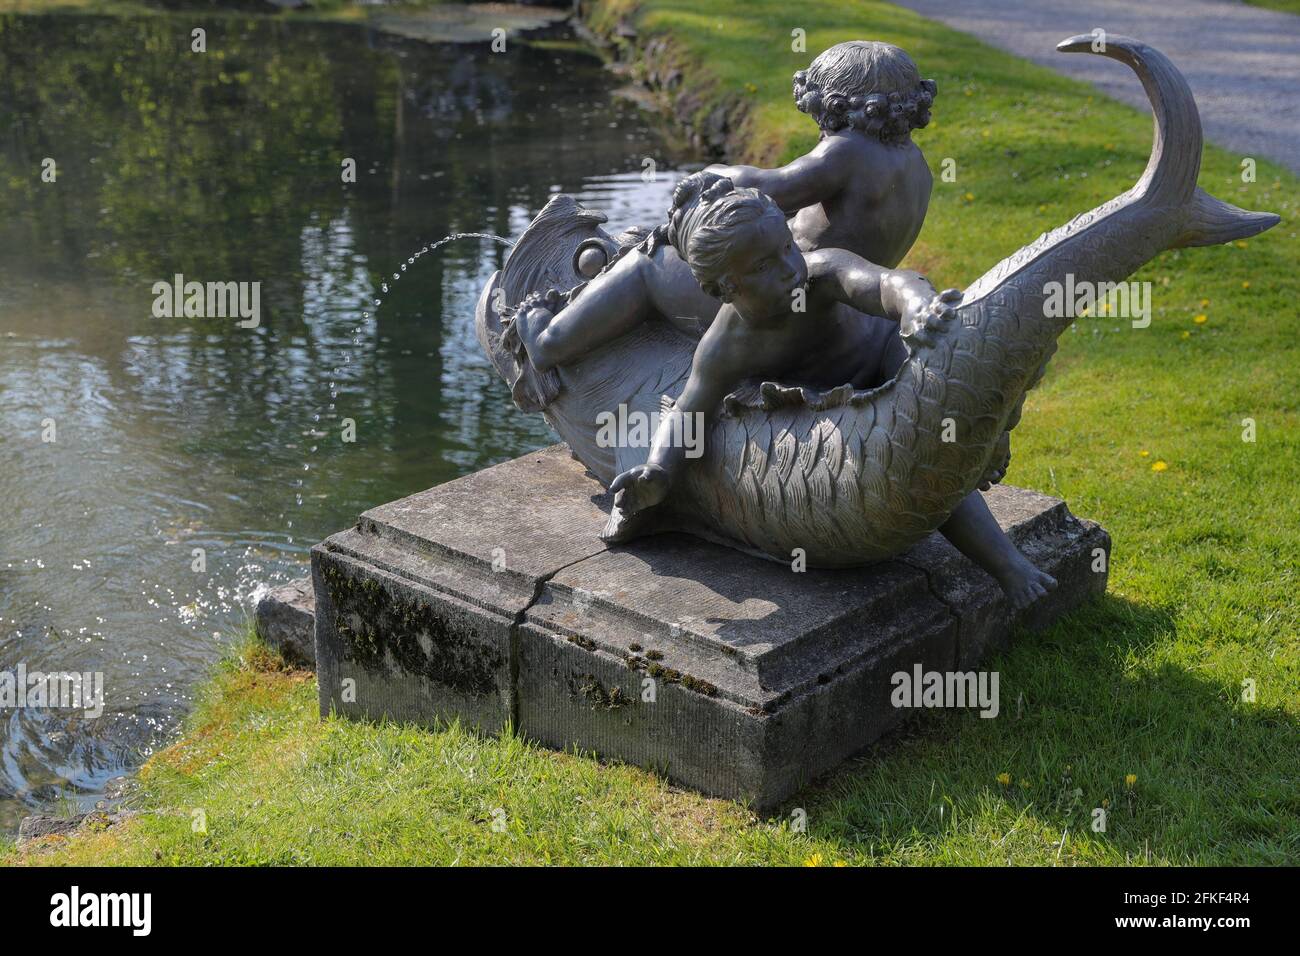 Namur, Belgium. 1st May, 2021. A fountain is seen in the Water Gardens of Annevoie in Annevoie-Rouillon, Namur, Belgium, May 1, 2021. The Water Gardens of Annevoie were designed and built by Charles-Alexis de Montpellier in the 18th century, with the combination of three ideas: 'art enhancing nature', 'art in tune with nature' and 'art imitating nature'. In 1930 the Gardens were opened for the general public. In 1982, the entire estate, including the gardens and the buildings, were listed as Historical Monuments. Credit: Zheng Huansong/Xinhua/Alamy Live News Stock Photo